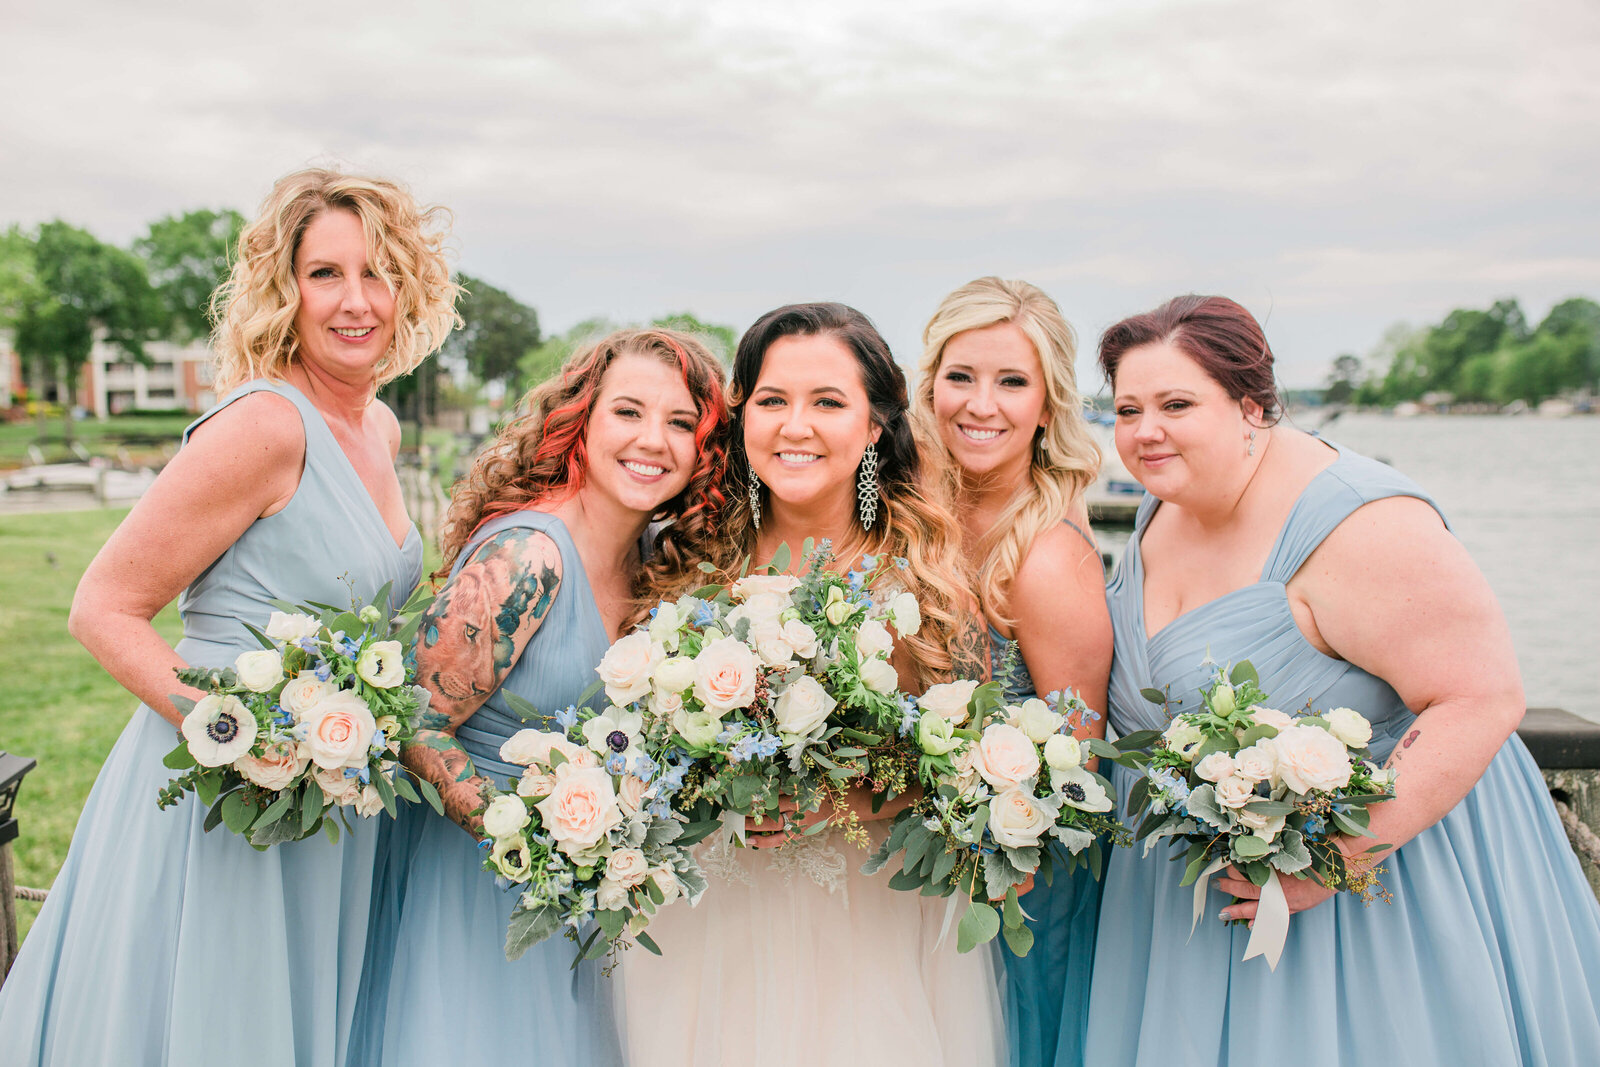 Virginia-Beach-Wedding-Planners-Sincerely-Jane-Events-7434